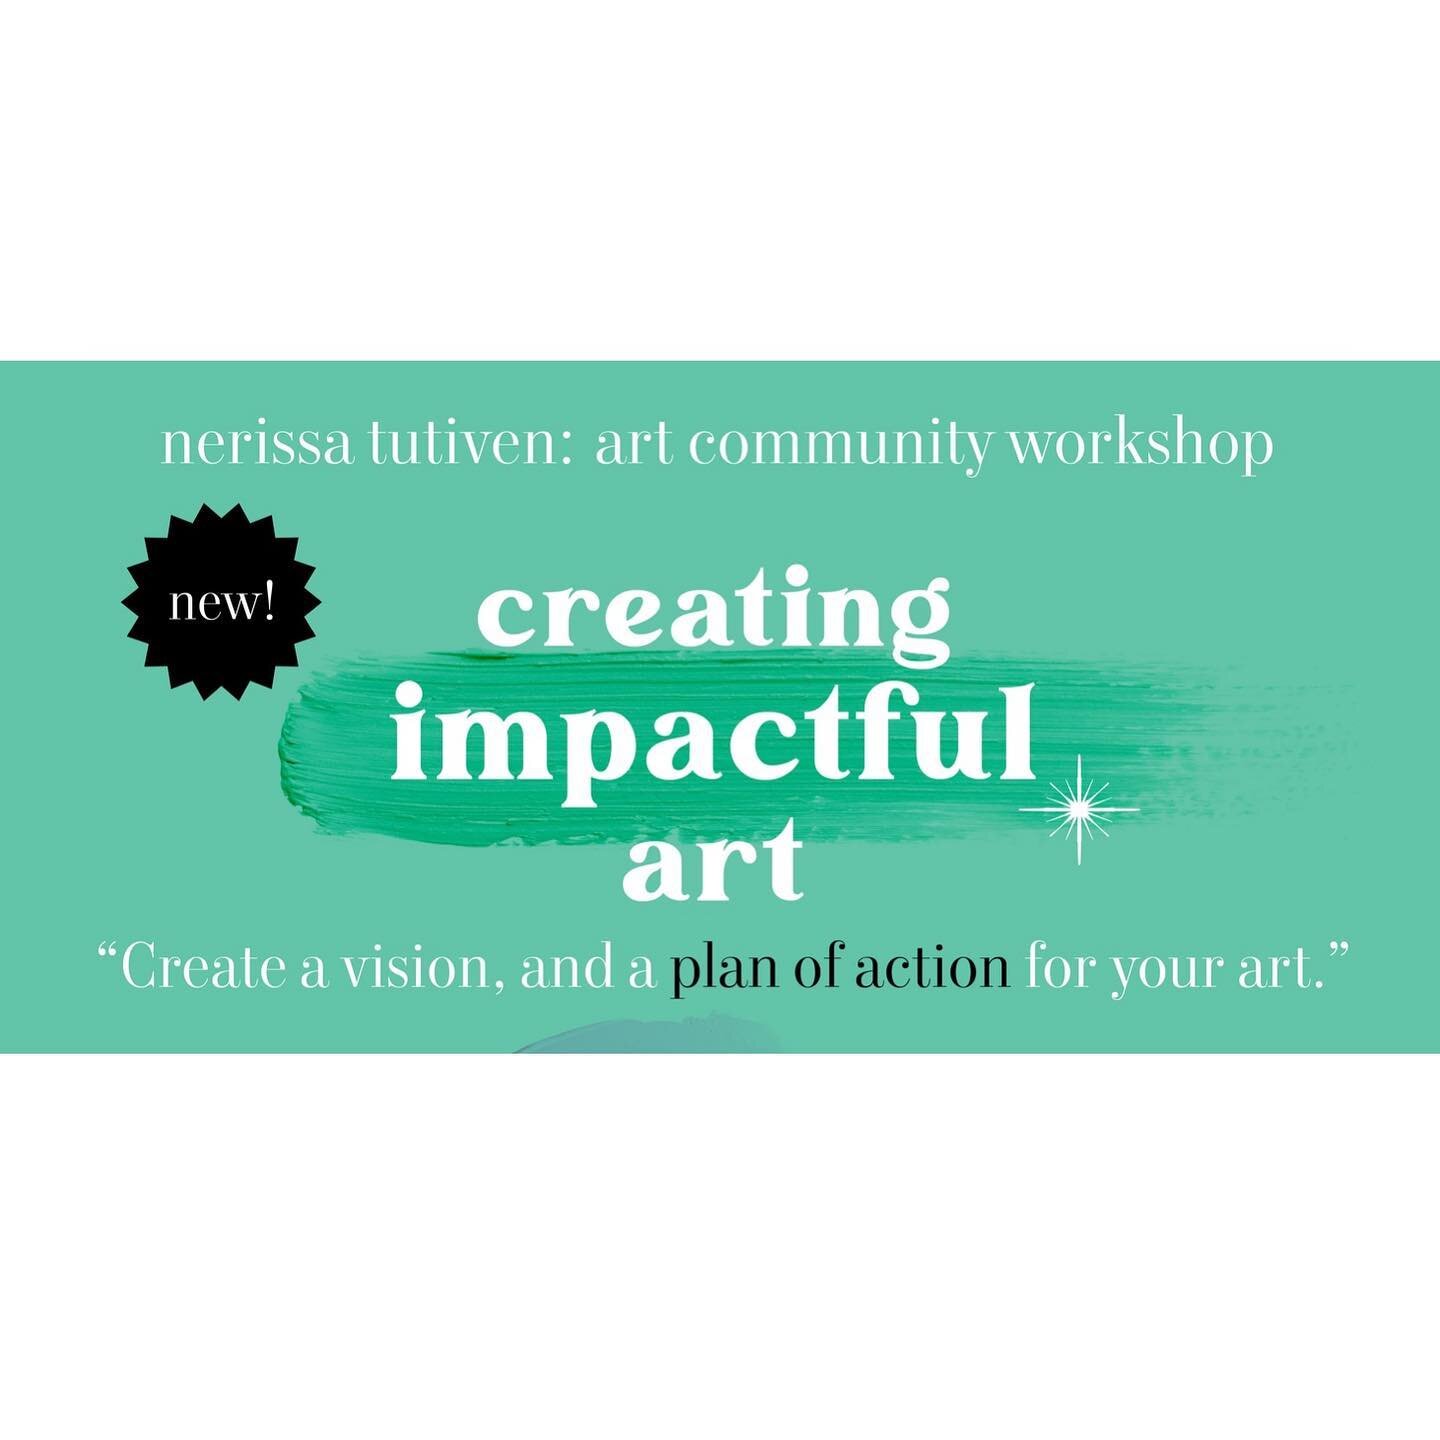 ⭐️ Go check out my website (Link in Bio), to read more about the New Workshop! I&rsquo;m hosting. 🌈✨💎

&ldquo;Creating Impactful Art&rdquo;
September 16th-30.

via Zoom
a 5-Class Workshop

#ArtClasses
#Workshops
#ConciousCommunity